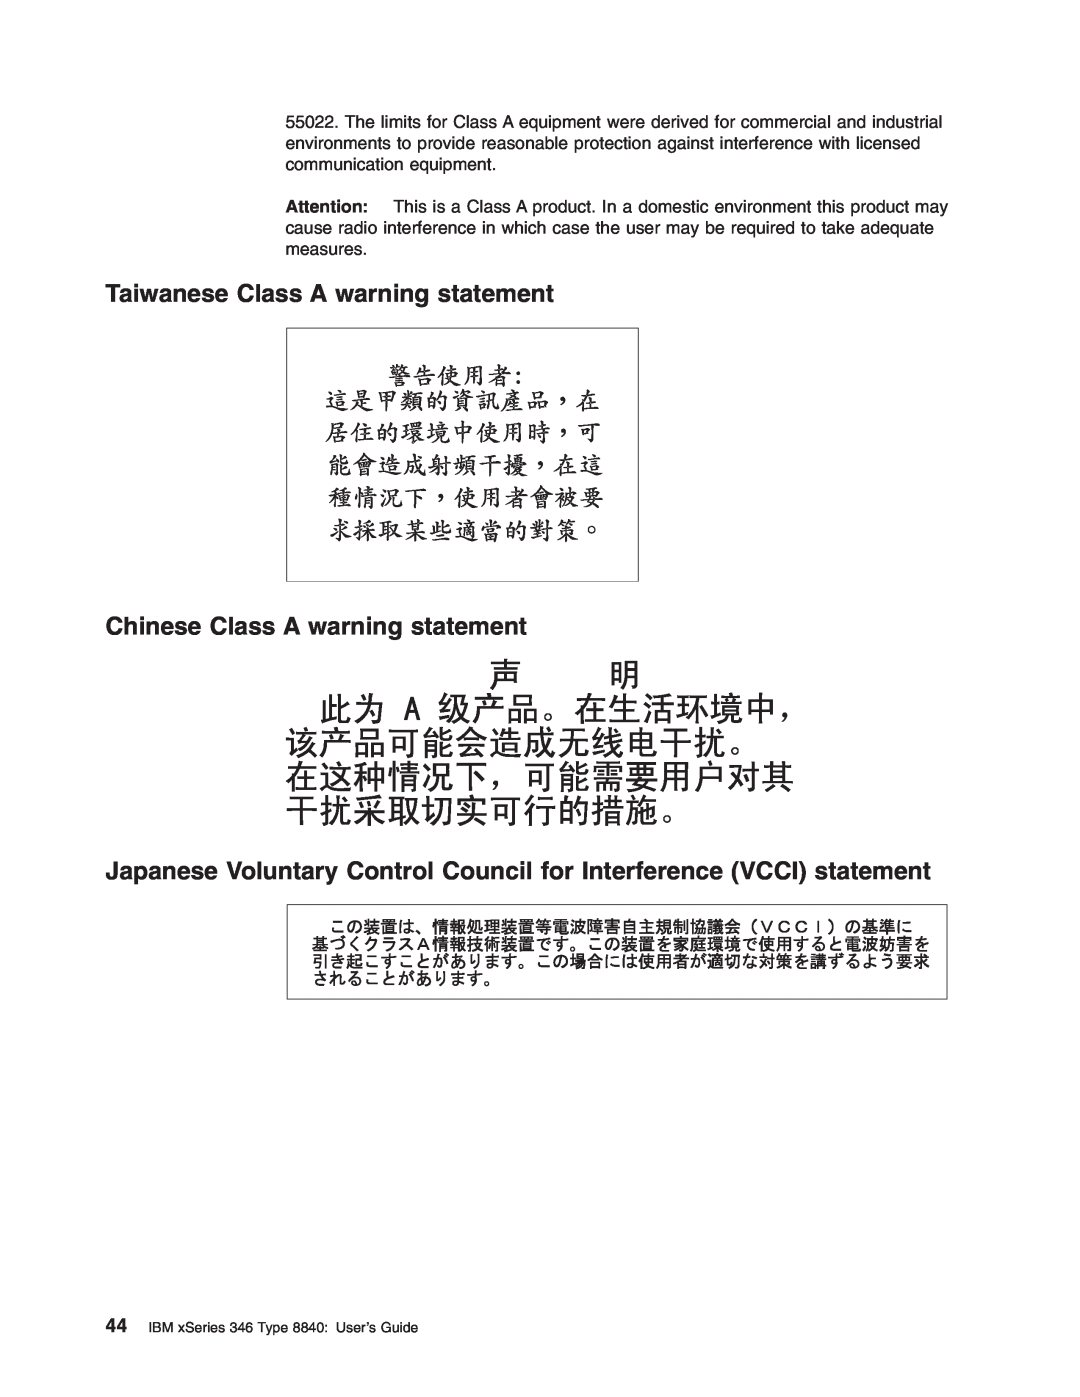 IBM manual Taiwanese Class A warning statement Chinese Class A warning statement, IBM xSeries 346 Type 8840 User’s Guide 